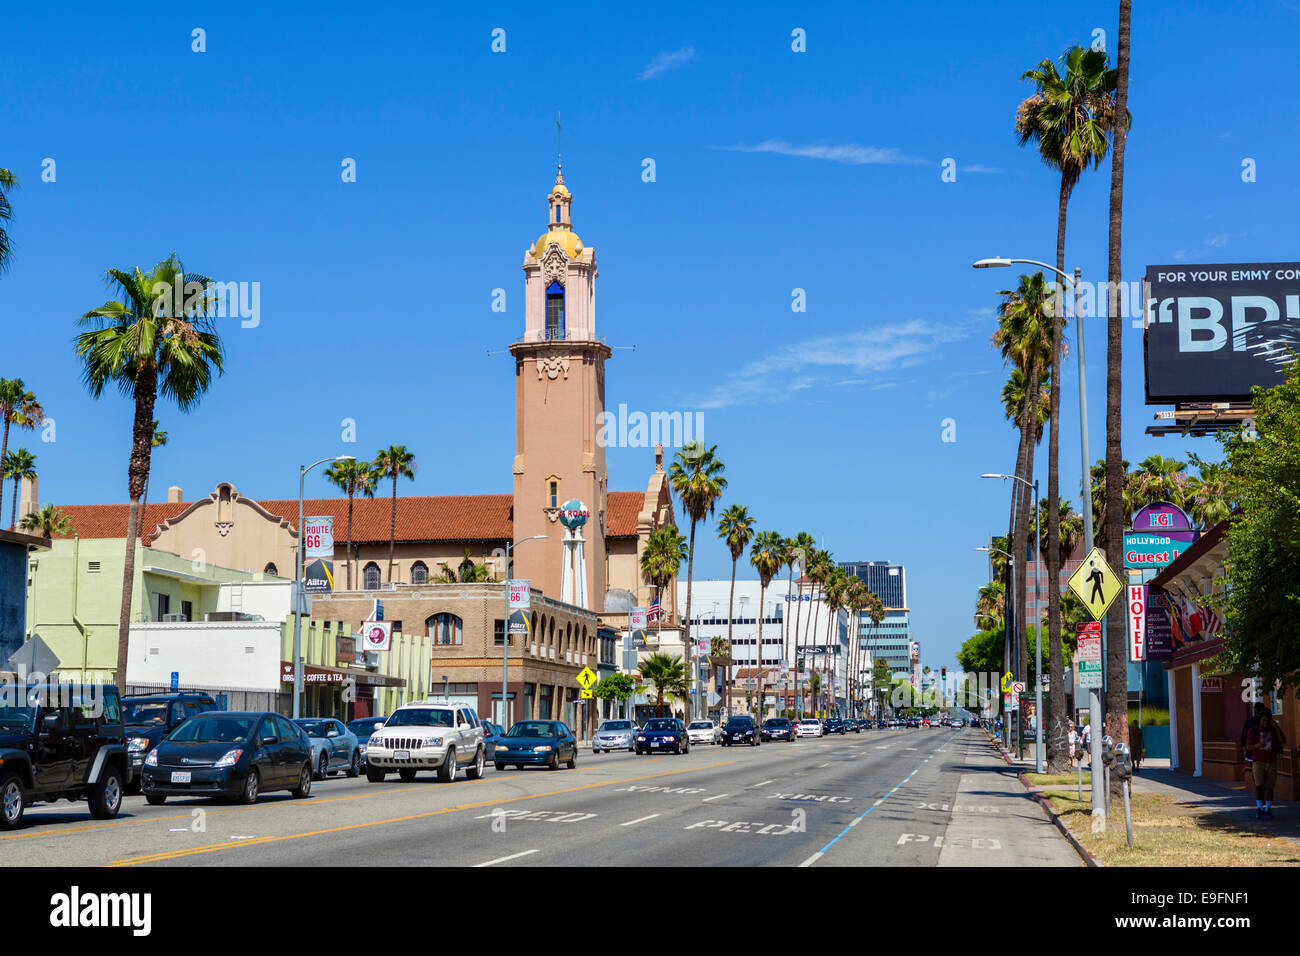 Sunset Boulevard looking towards Crossroads of the World, Sunset Strip, West Hollywood, Los Angeles, California, USA Stock Photo